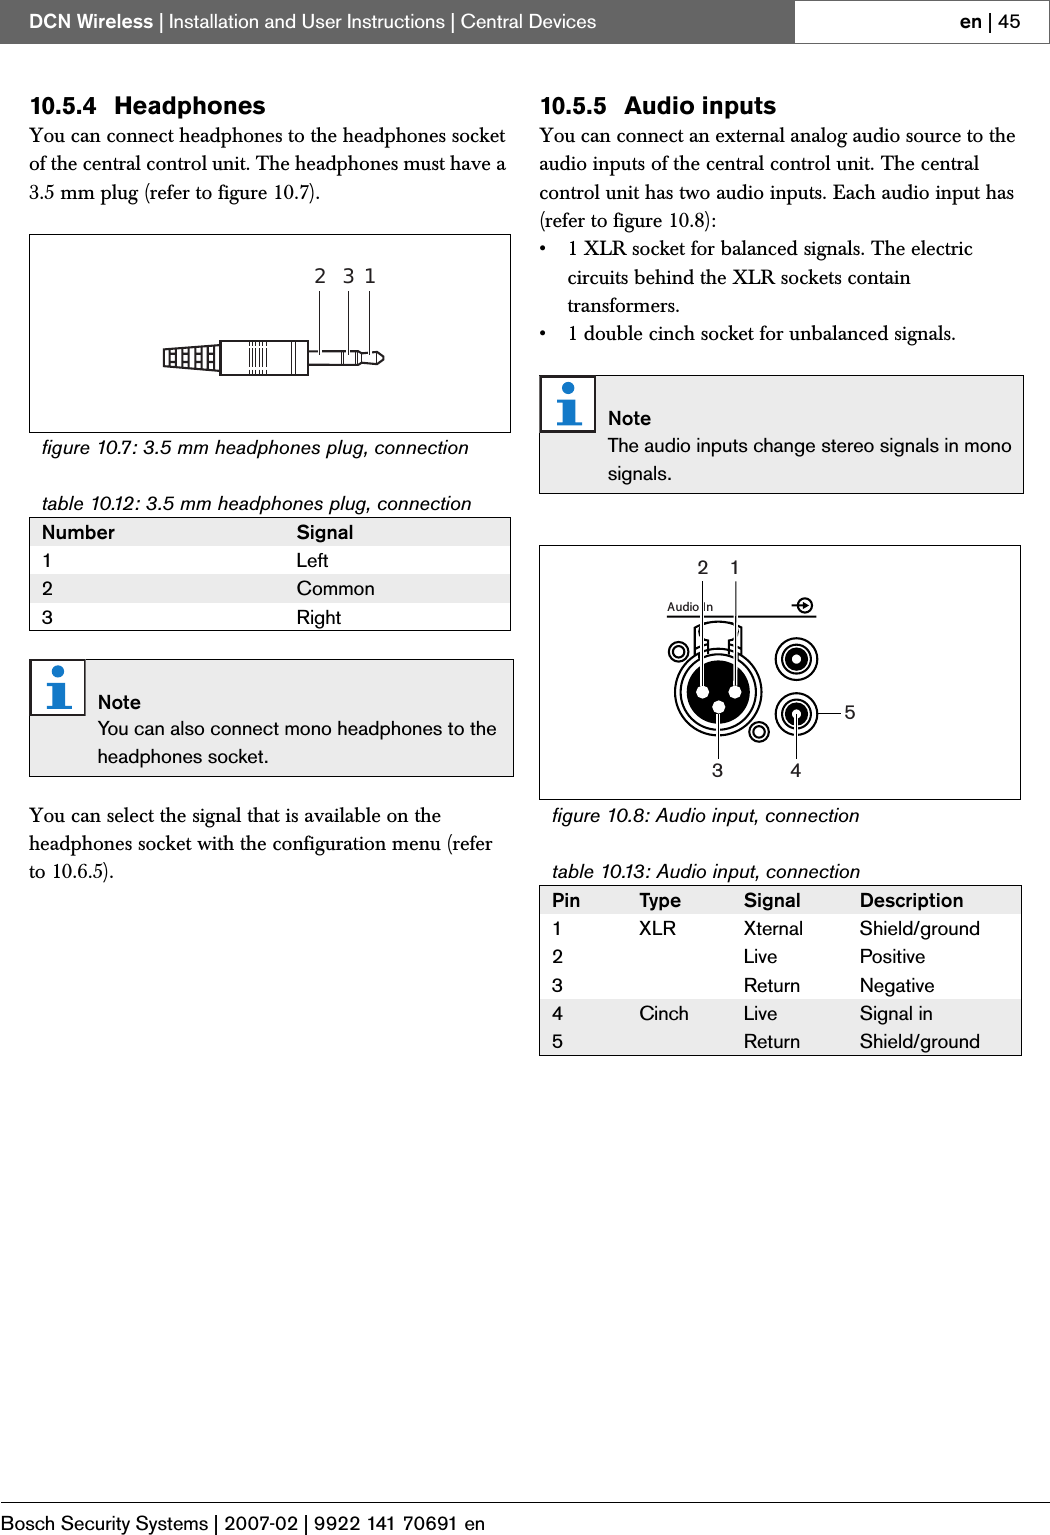 Page 16 of Bosch Security Systems DCNWAP Wireless Access Point User Manual Part 2